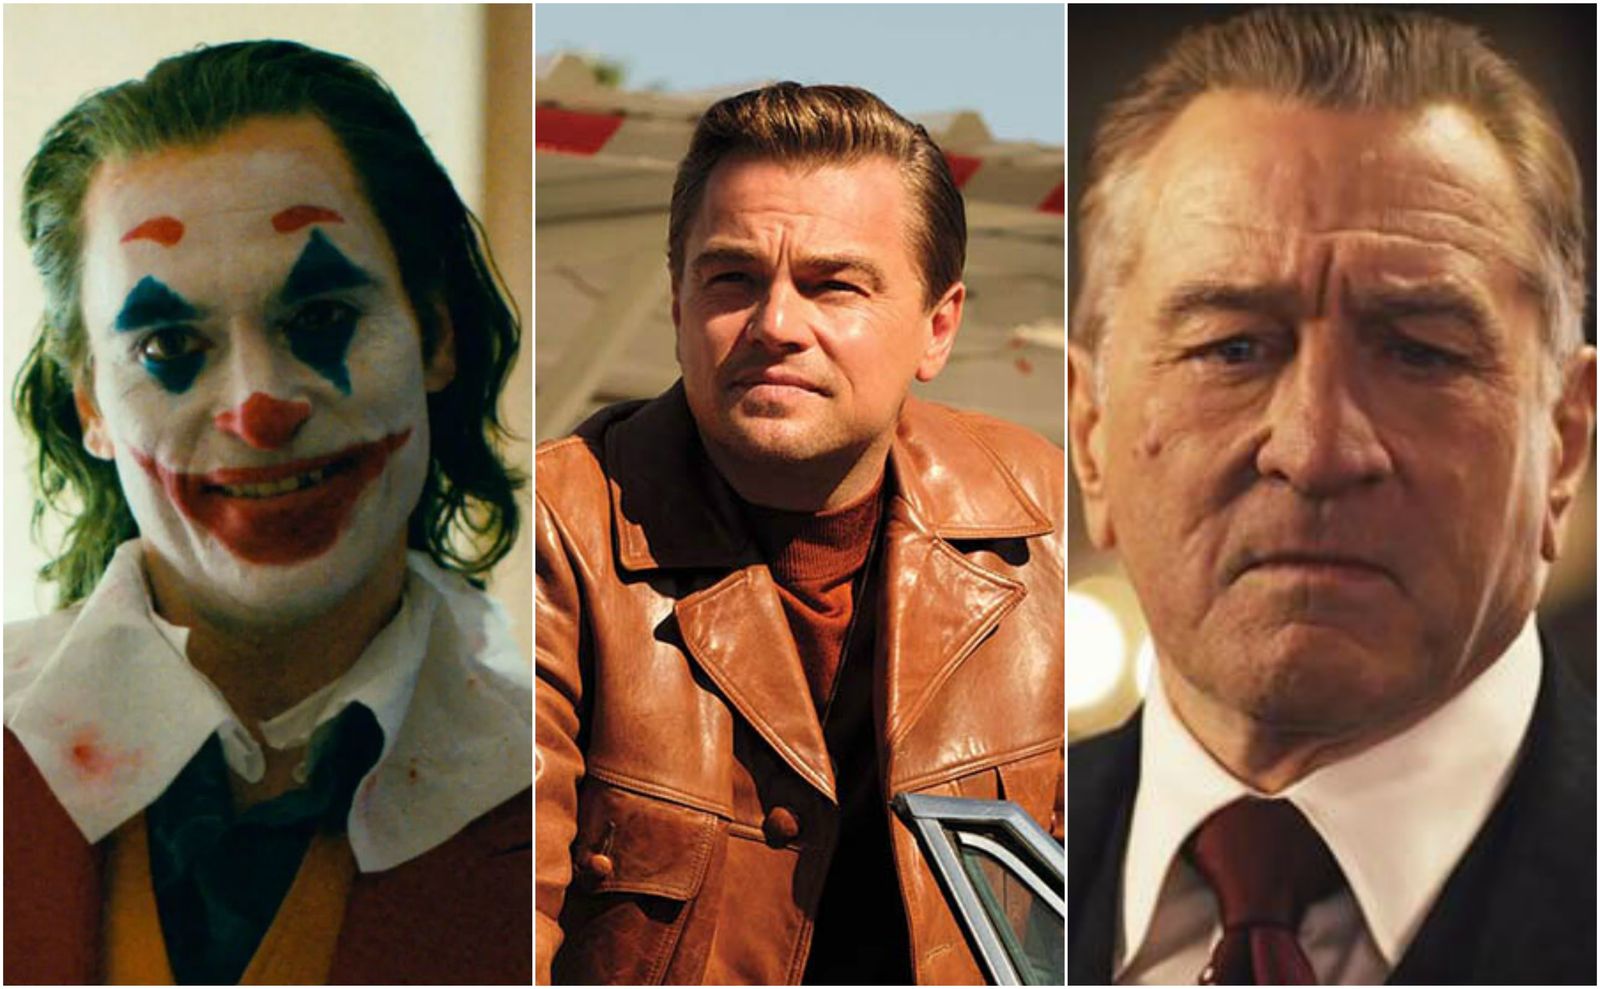 BAFTA 2020 Nominees Are Here: Joker Takes The Lead With 11 Nominations